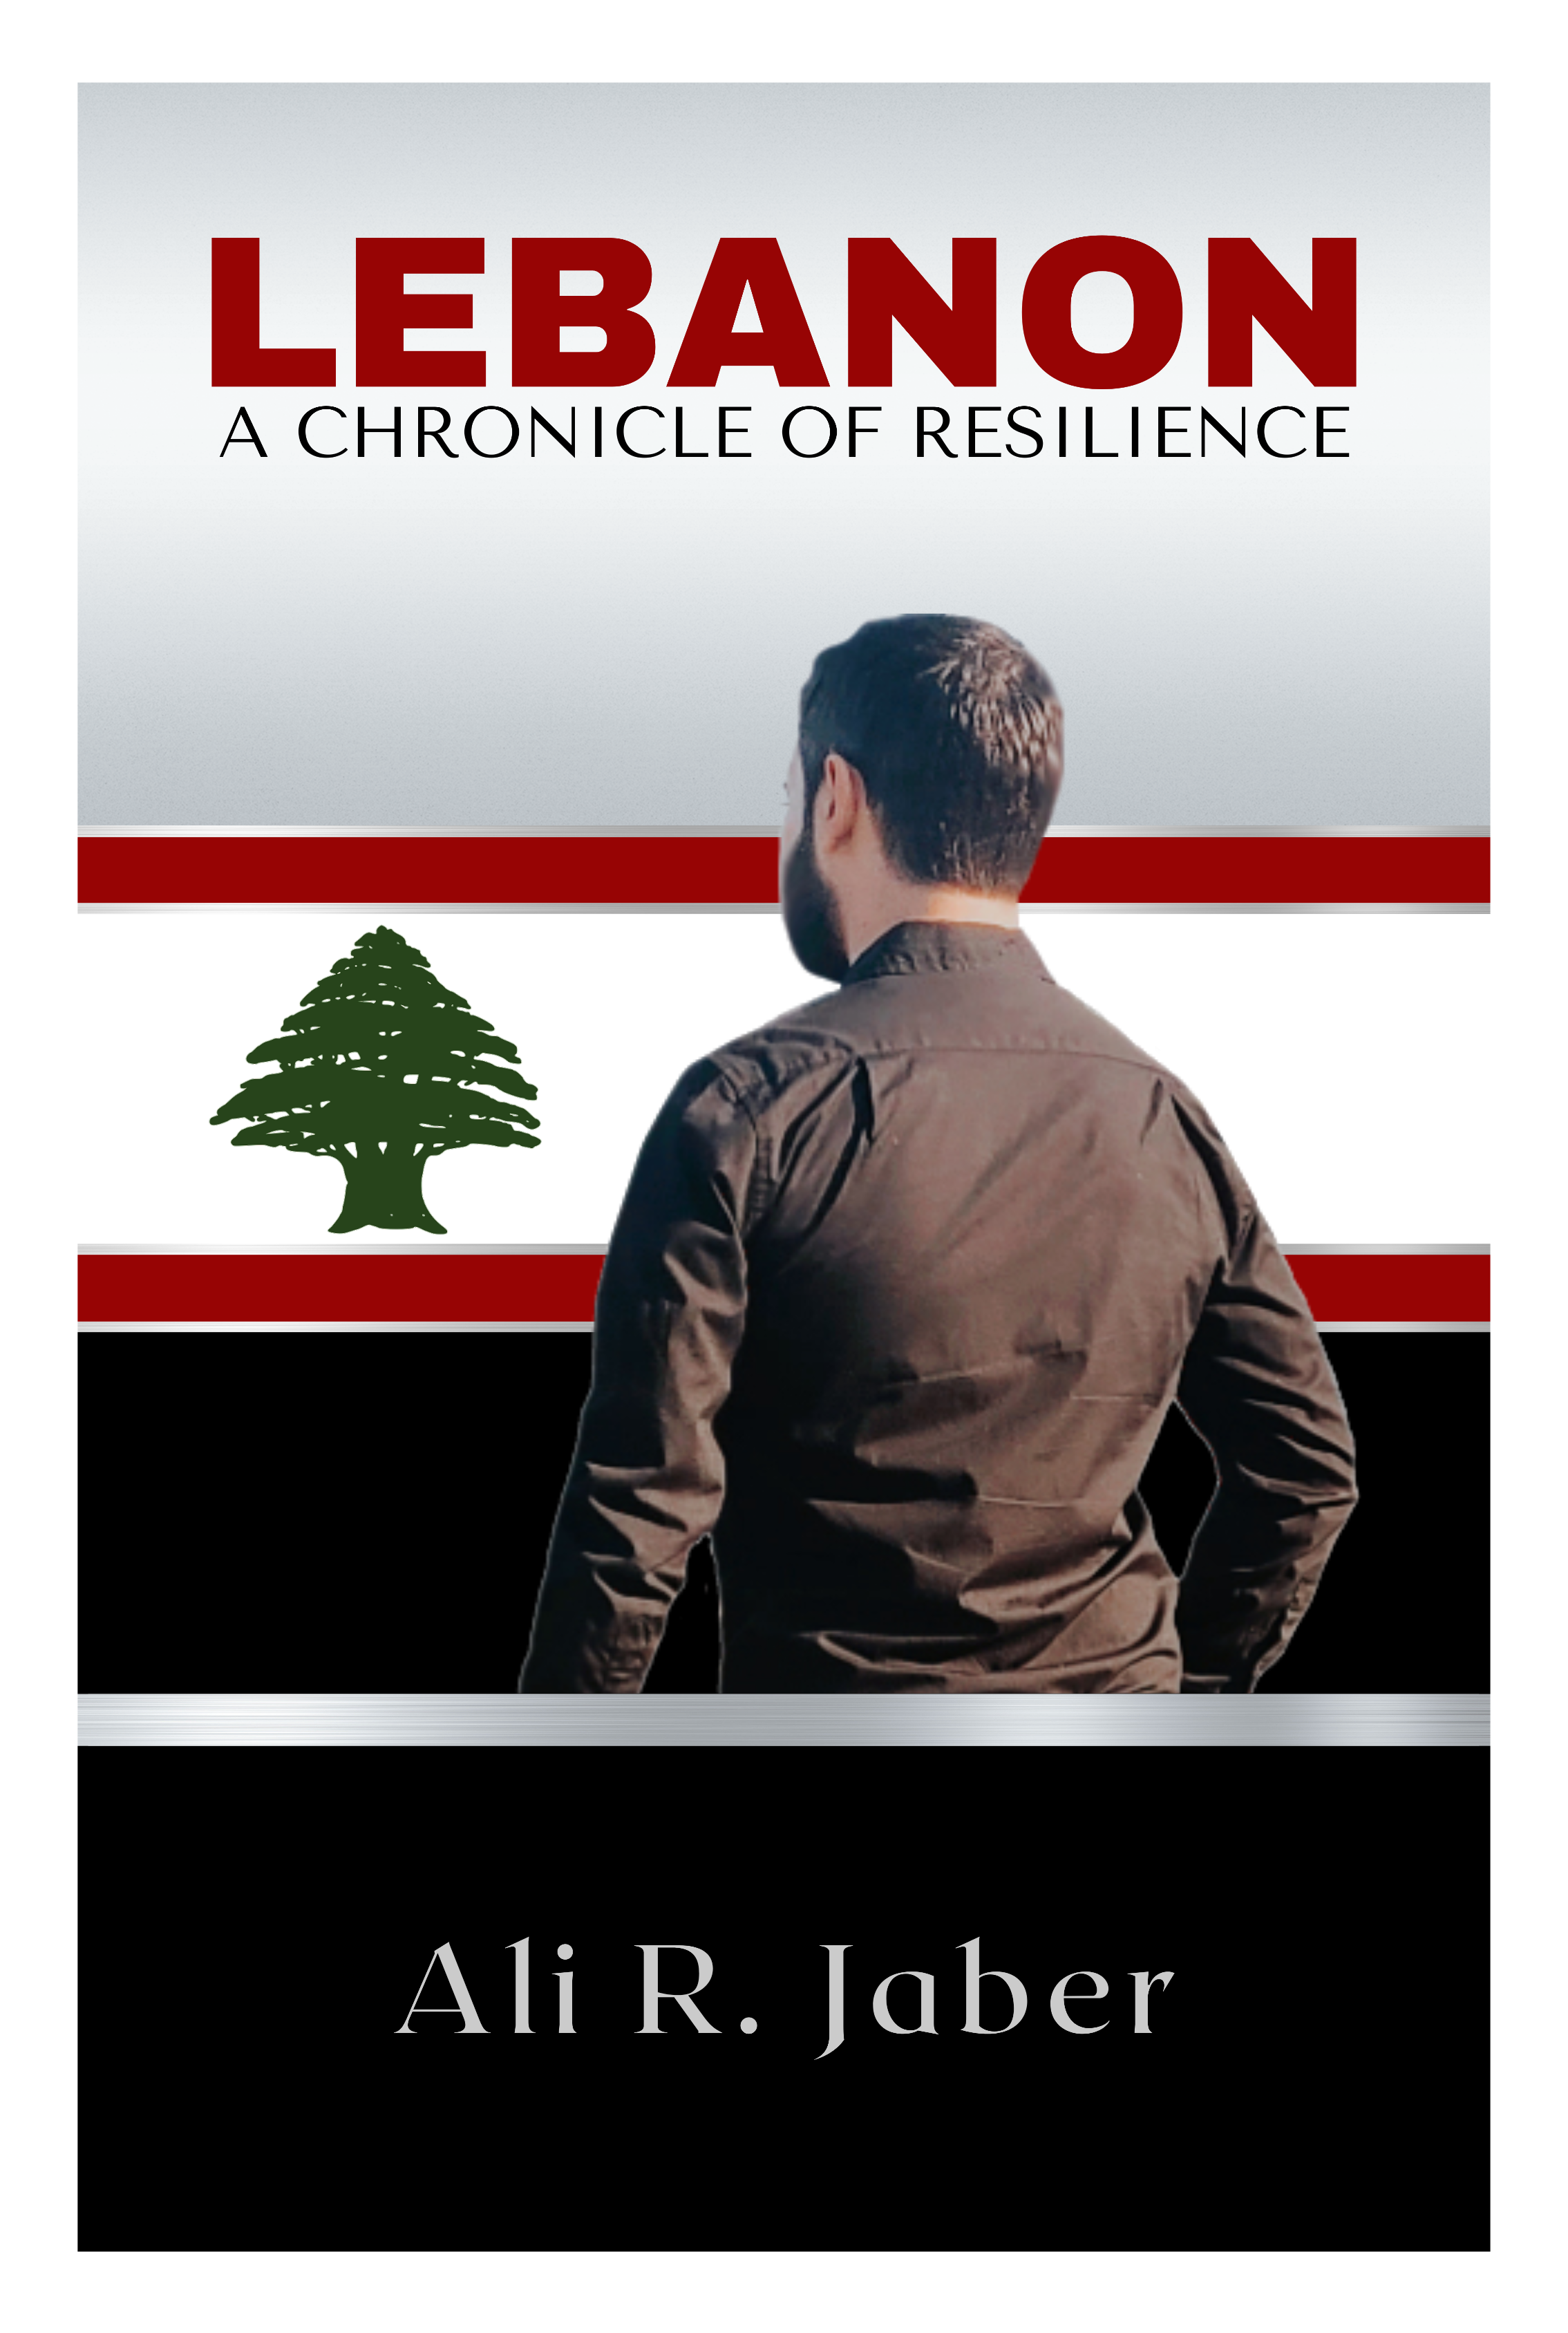 University of Michigan-Dearborn Student and Metro Detroit Author Publishes New Book About Lebanon